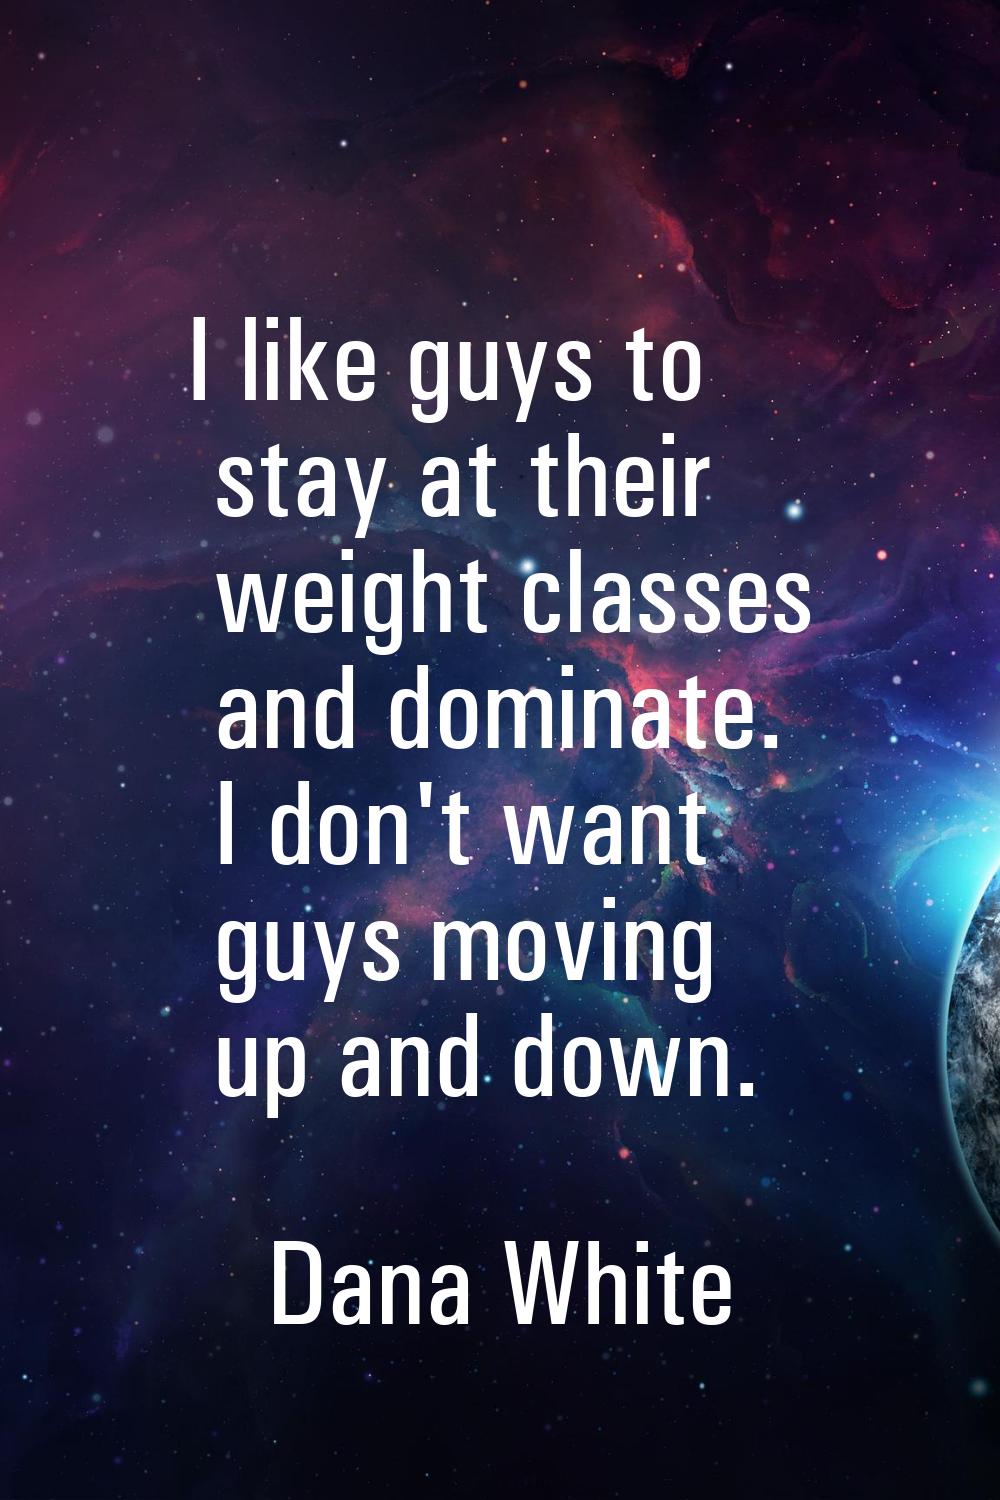 I like guys to stay at their weight classes and dominate. I don't want guys moving up and down.